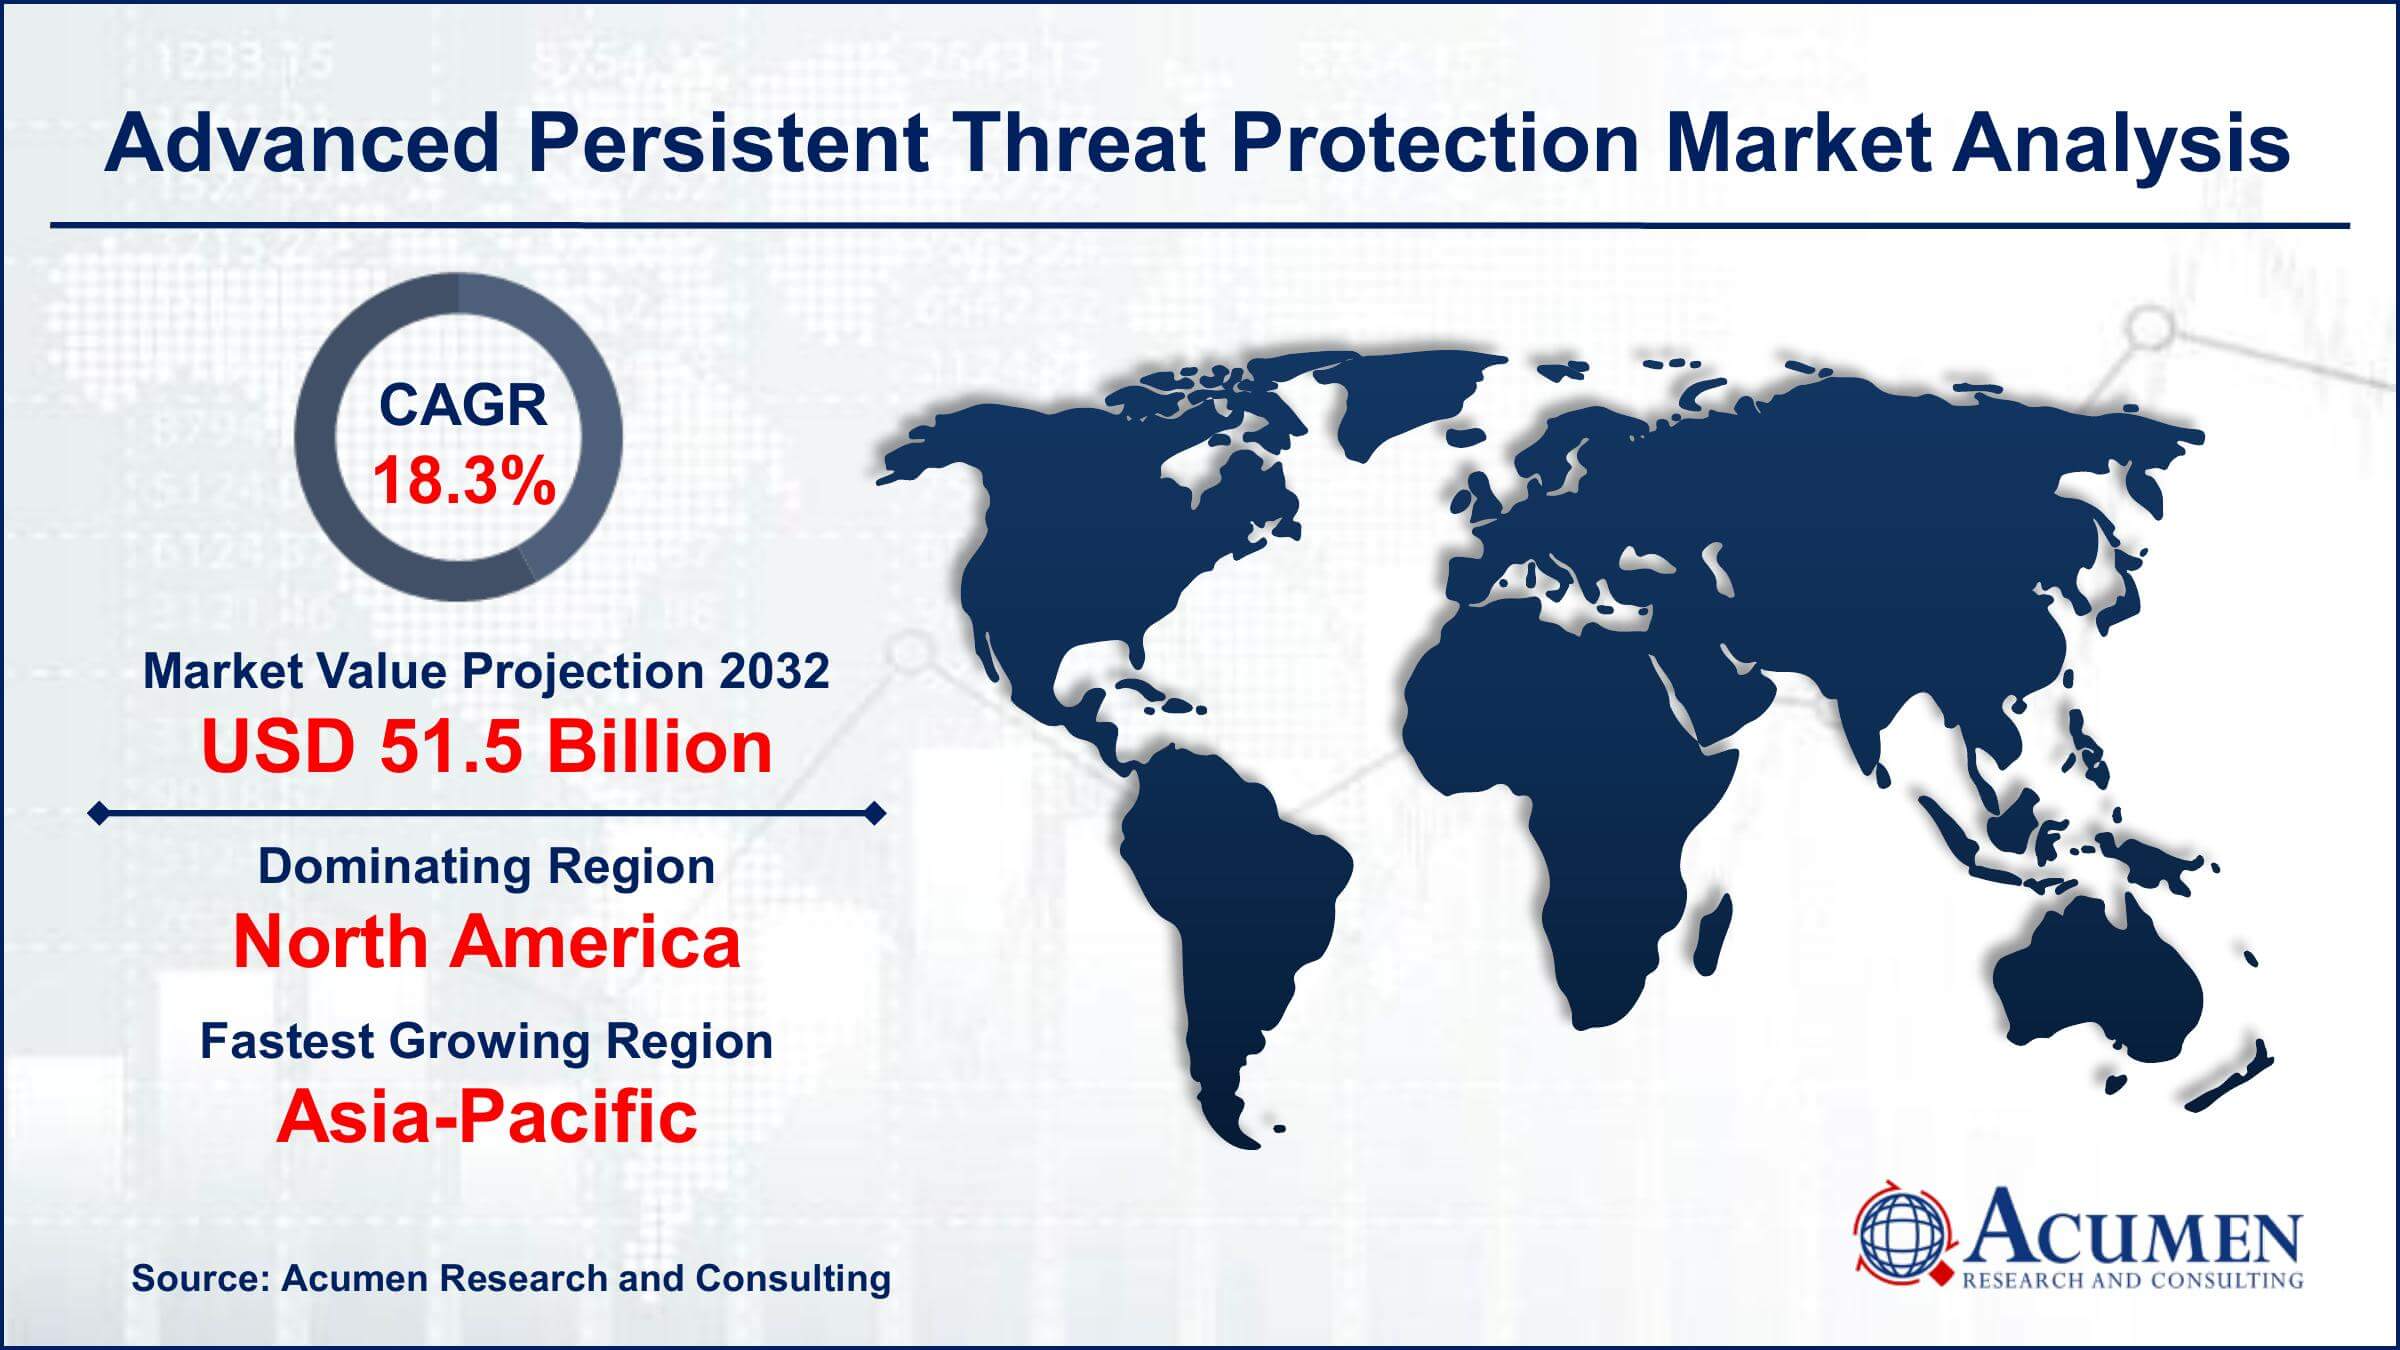 Global Advanced Persistent Threat Protection Market Trends